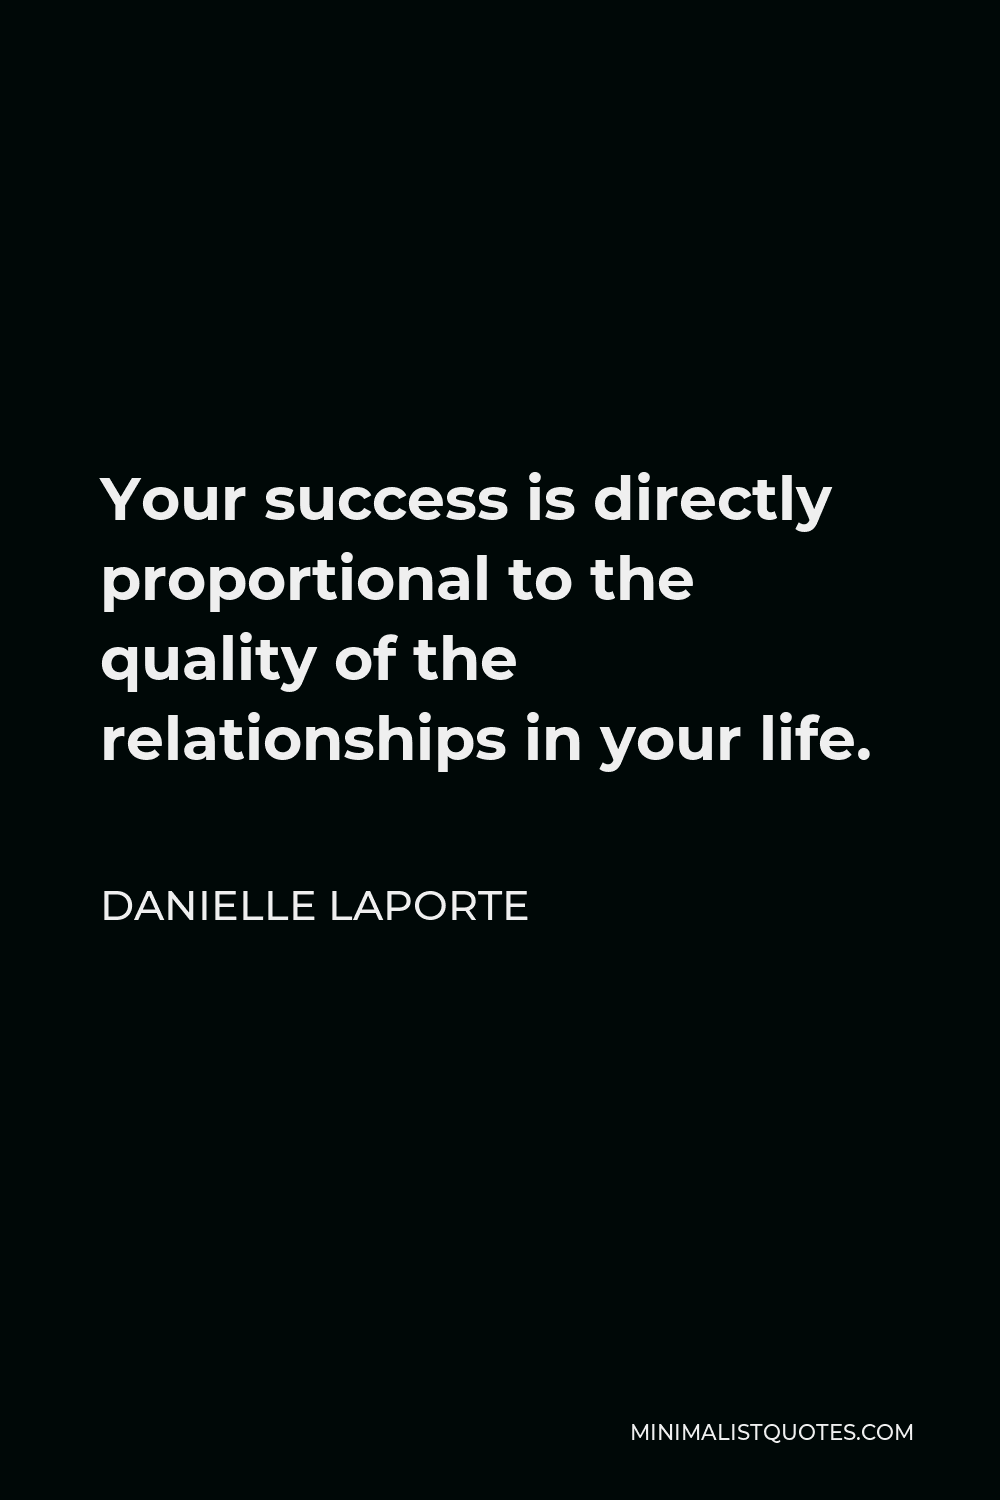 Danielle LaPorte Quote - Your success is directly proportional to the quality of the relationships in your life.